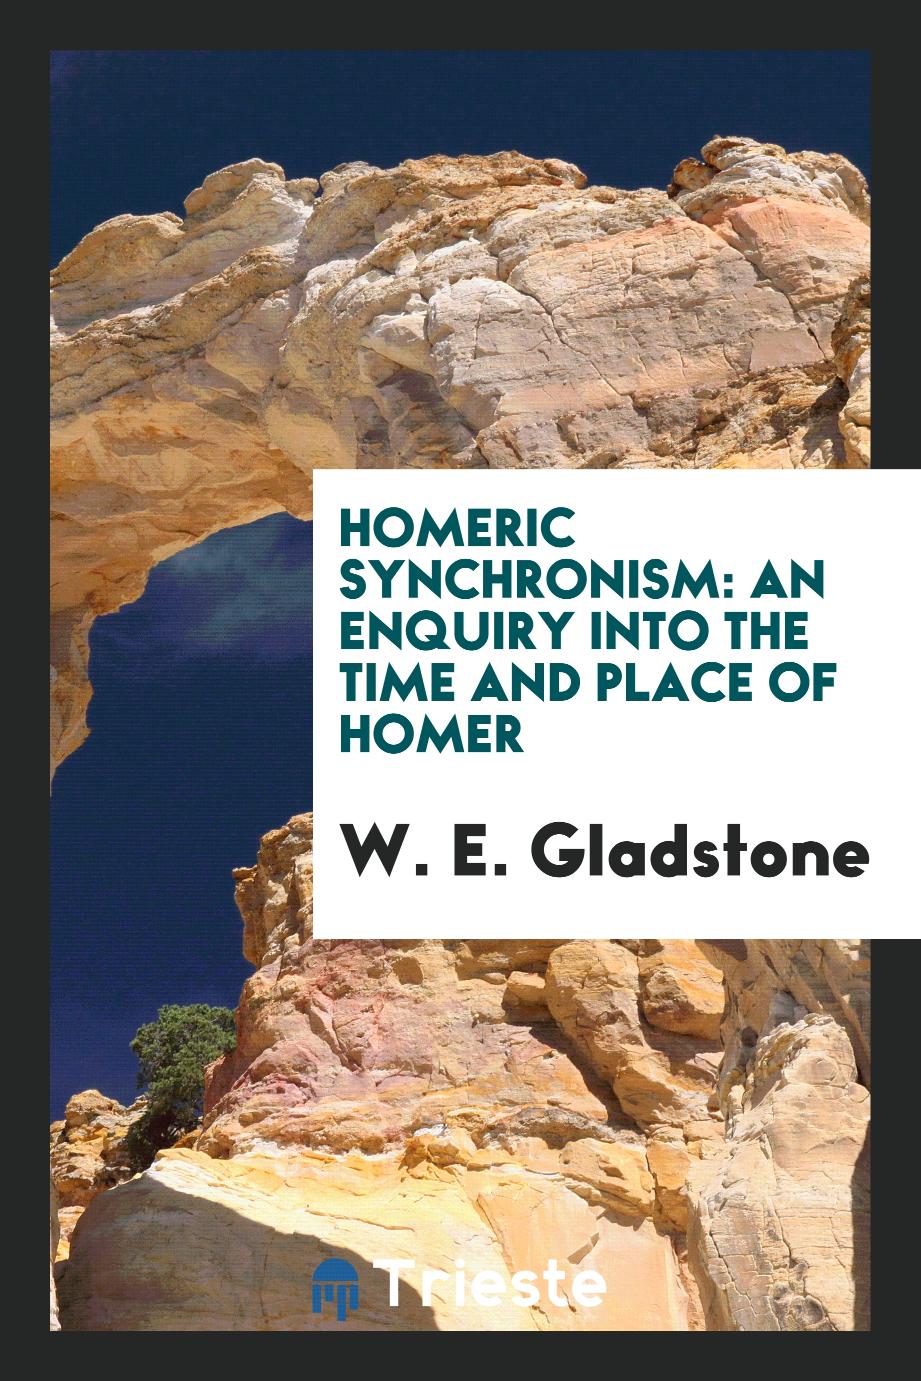 Homeric synchronism: an enquiry into the time and place of Homer